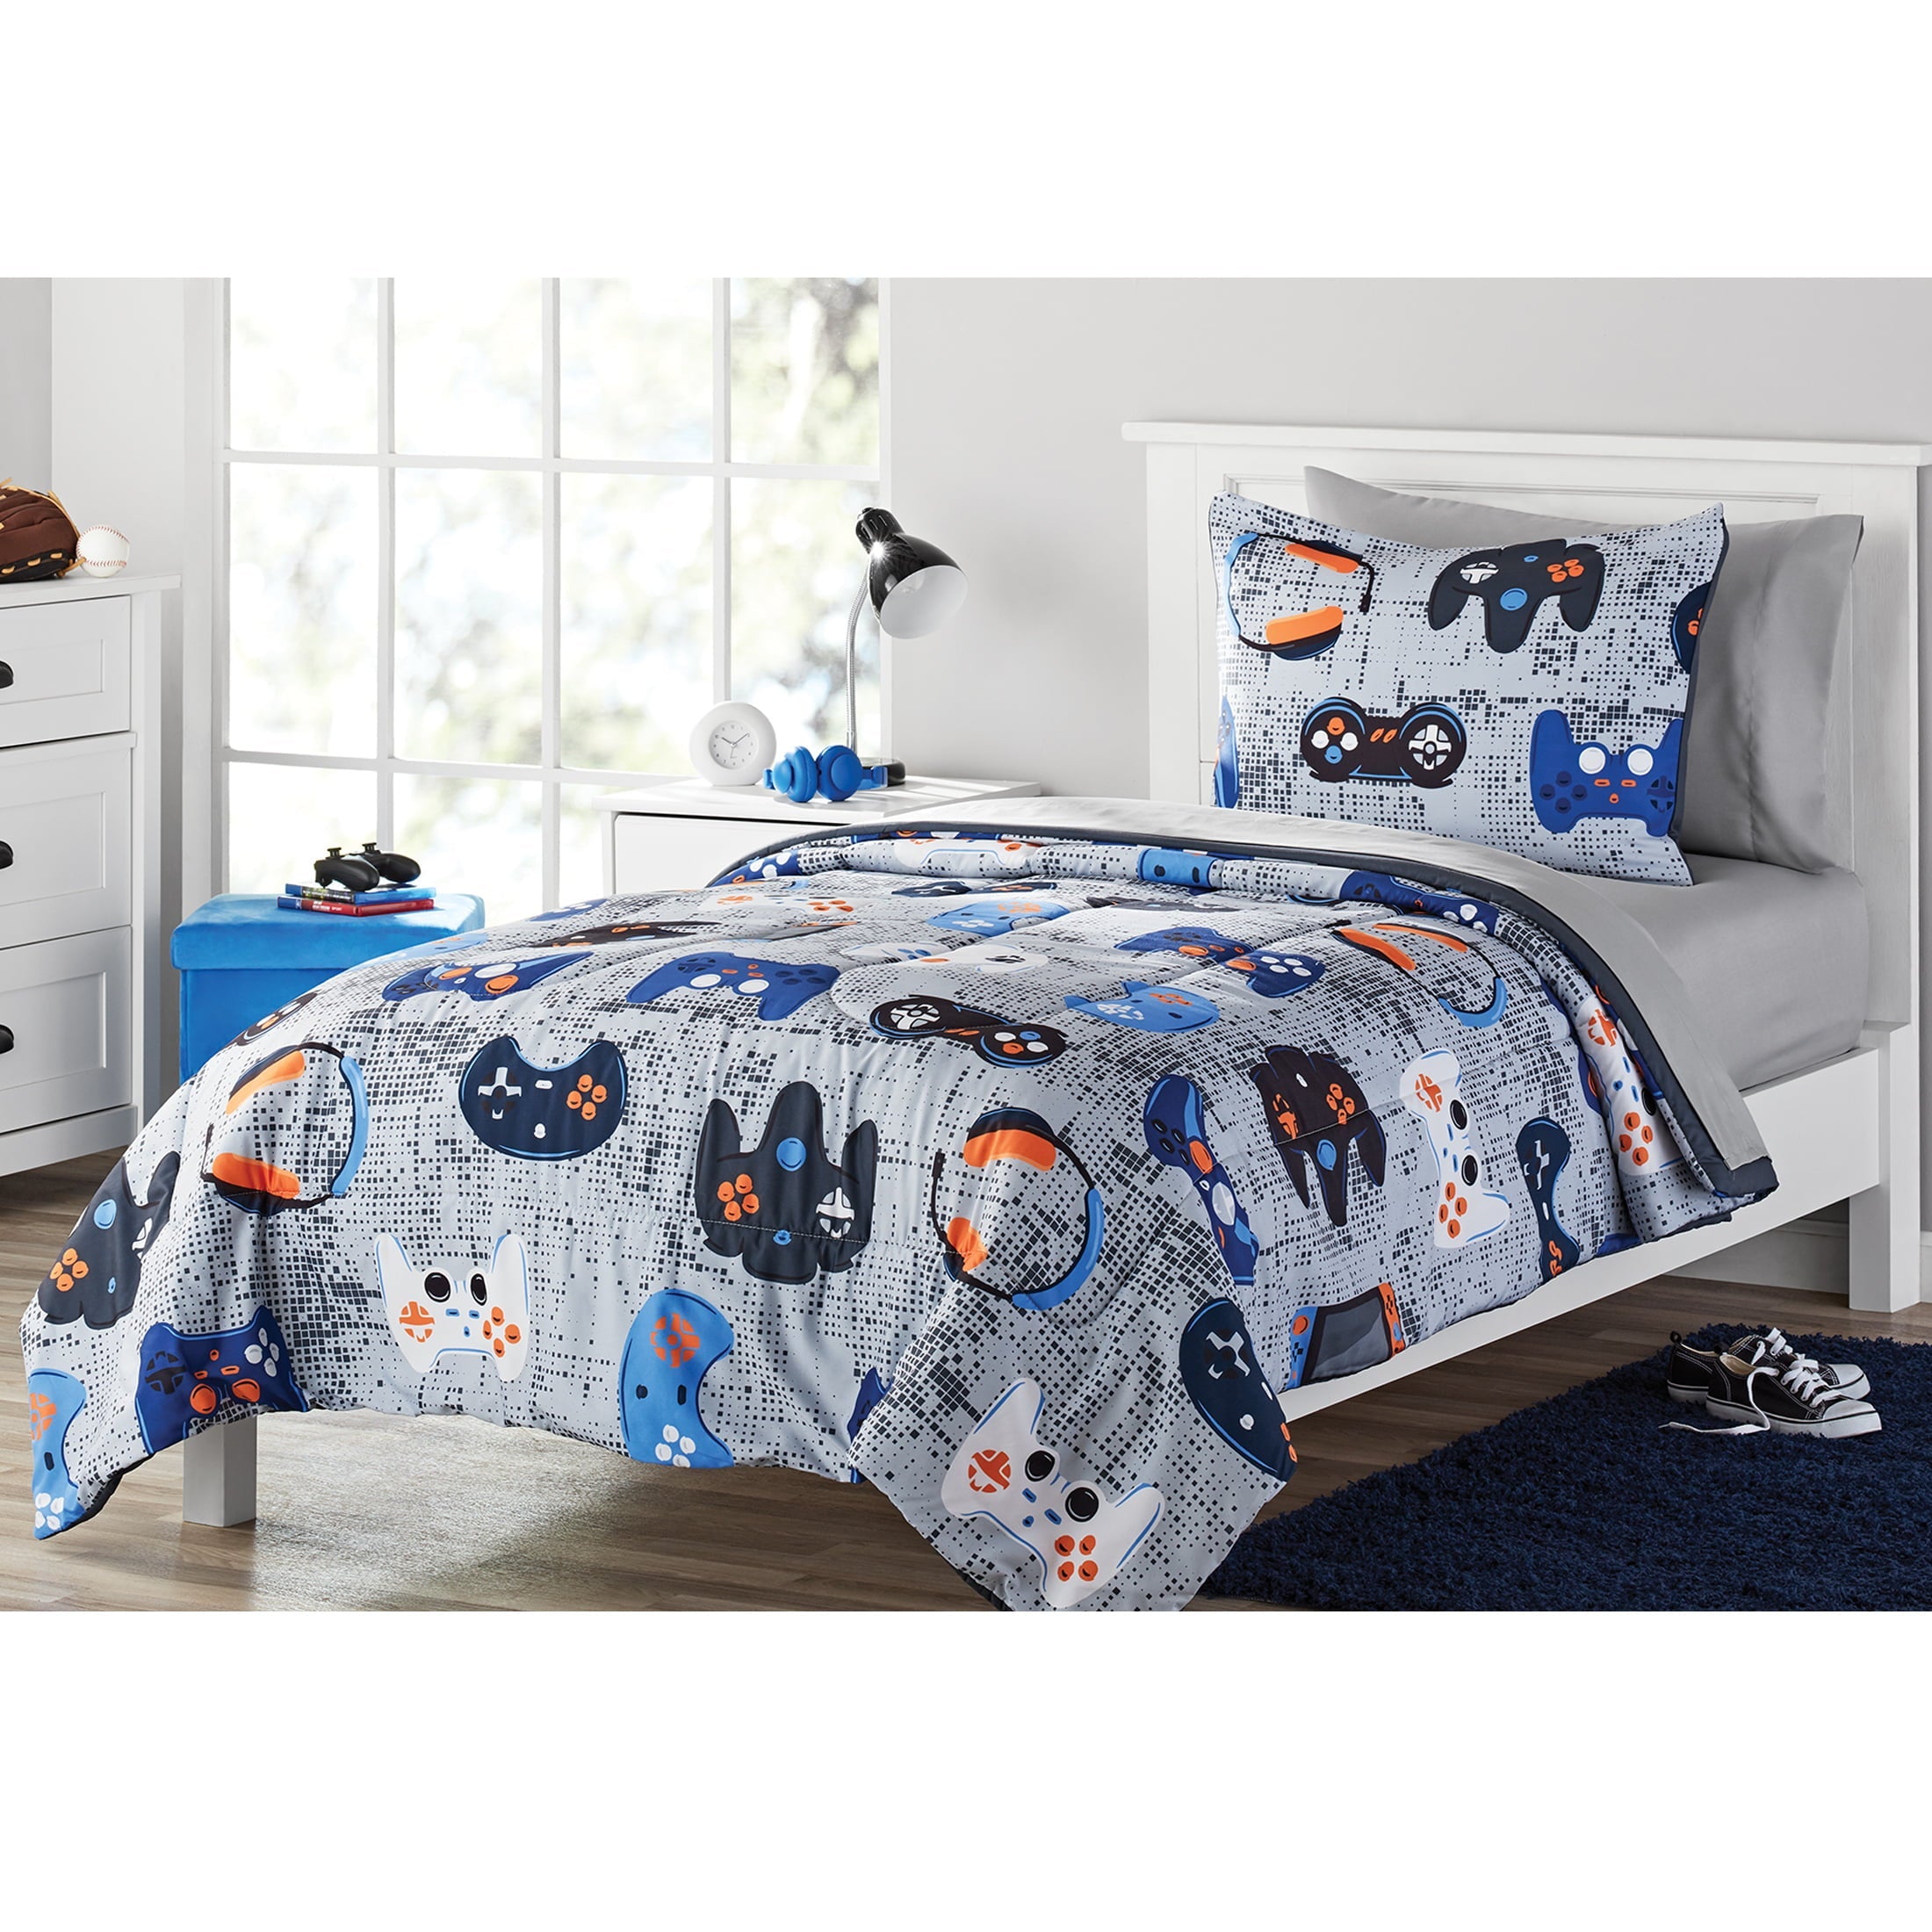 Your Zone Kids Gamer 5-Piece Video Game Themed Bed-in-a-Bag, Twin